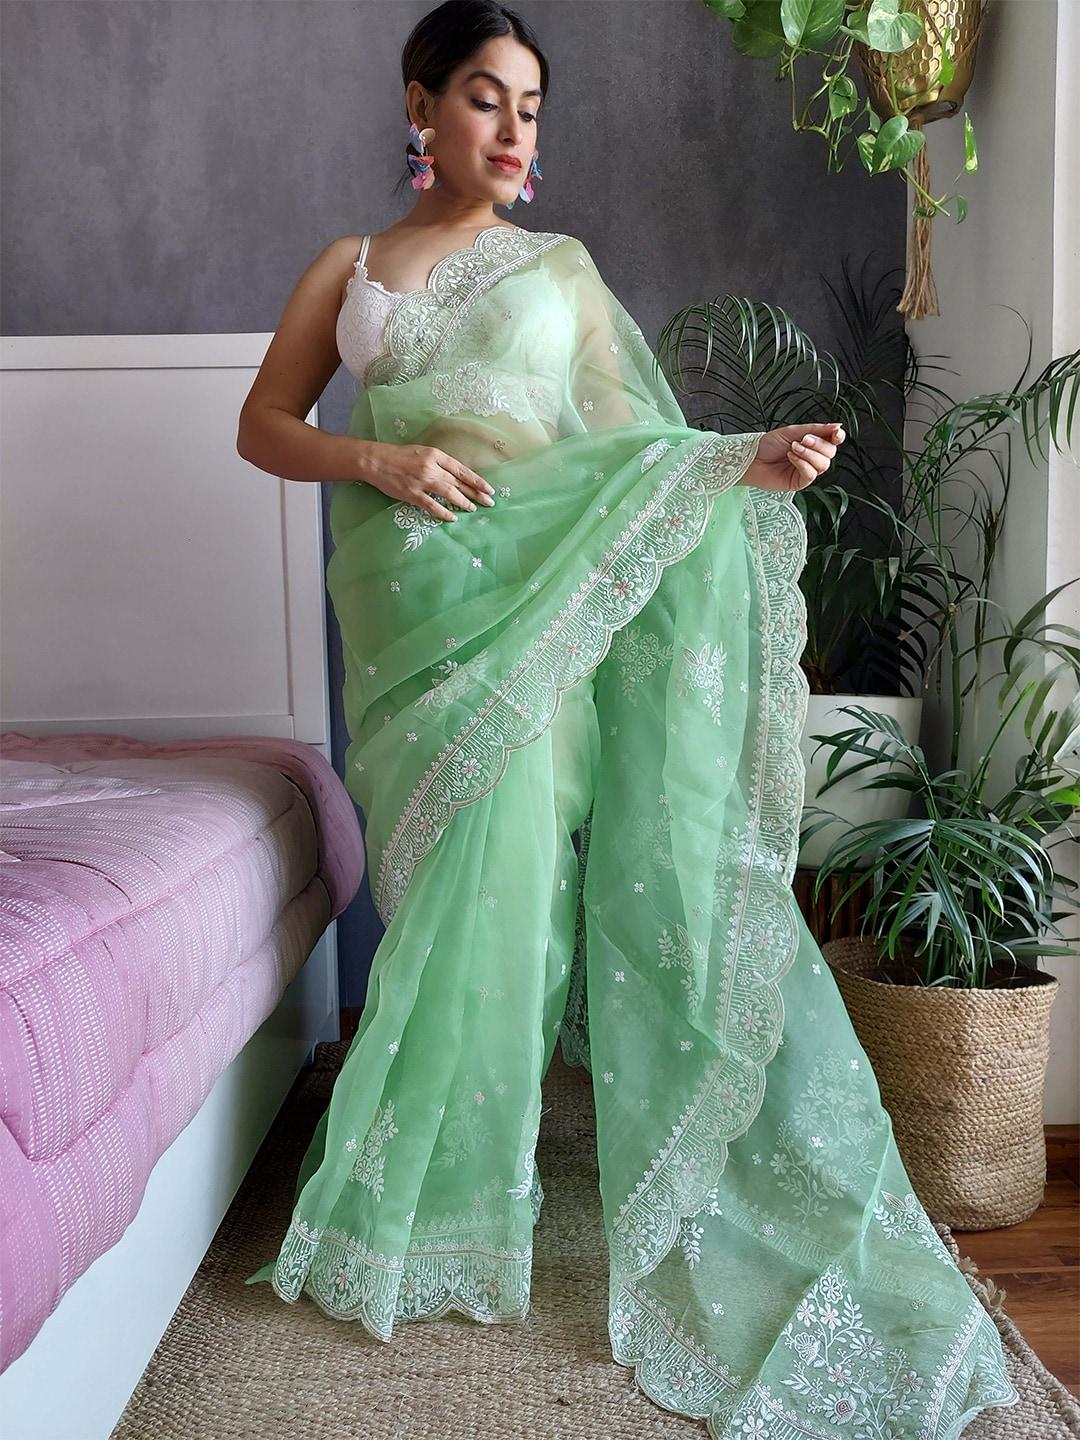 Stylefables Floral Embroidered Saree